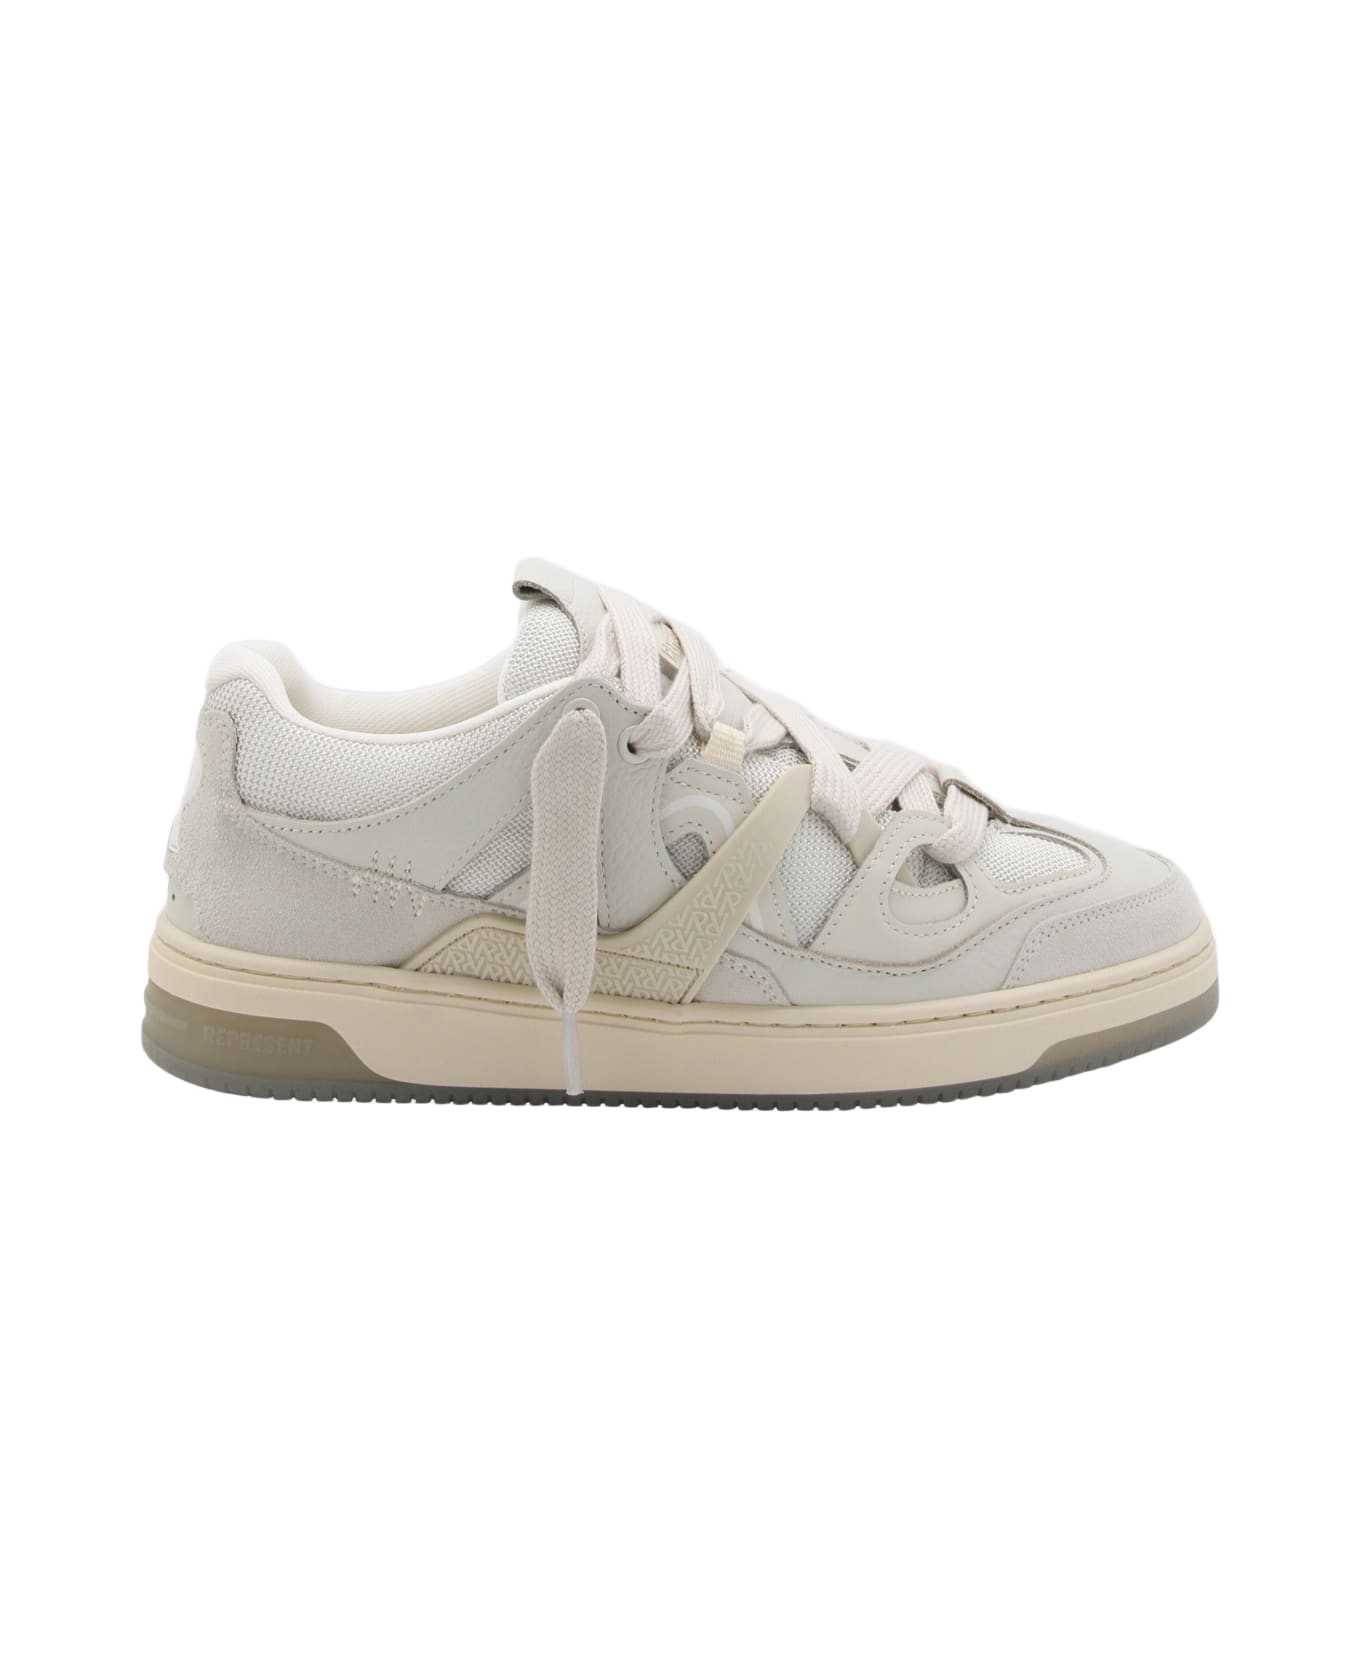 REPRESENT White Leather Sneakers - FLAT WHITE